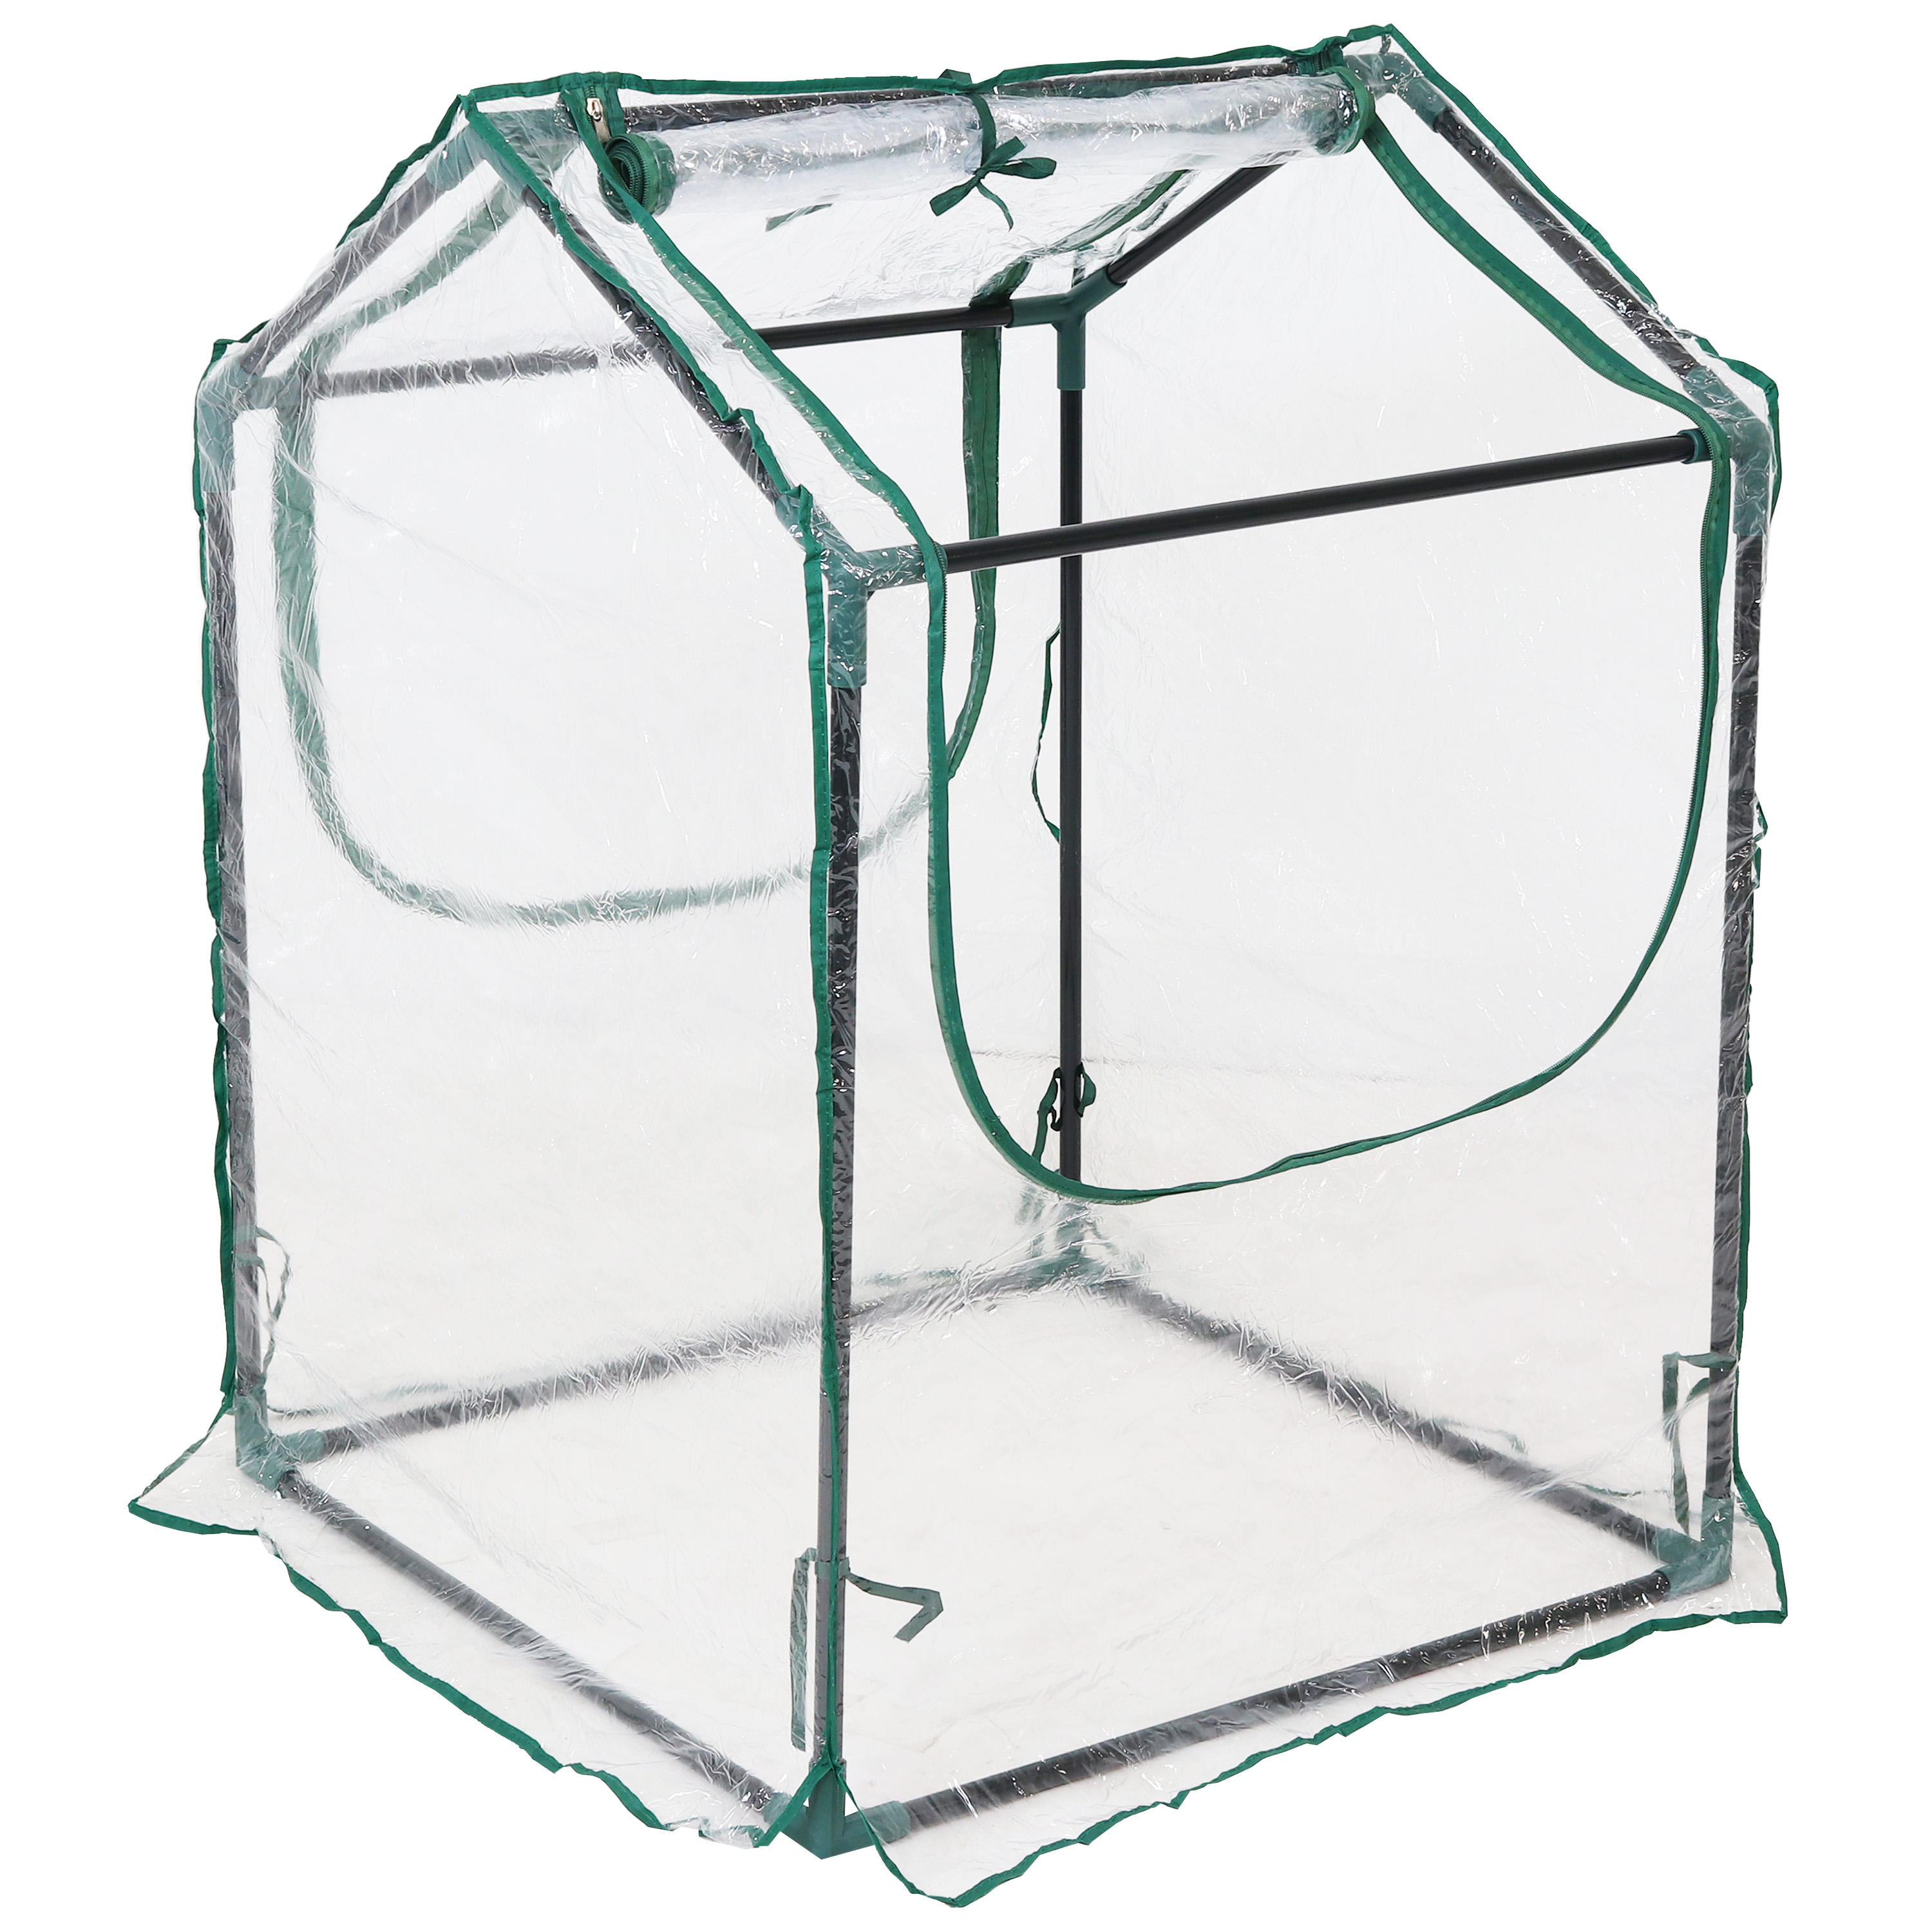 2 x 2 ft Steel Mini Greenhouse with 2 Doors - Clear